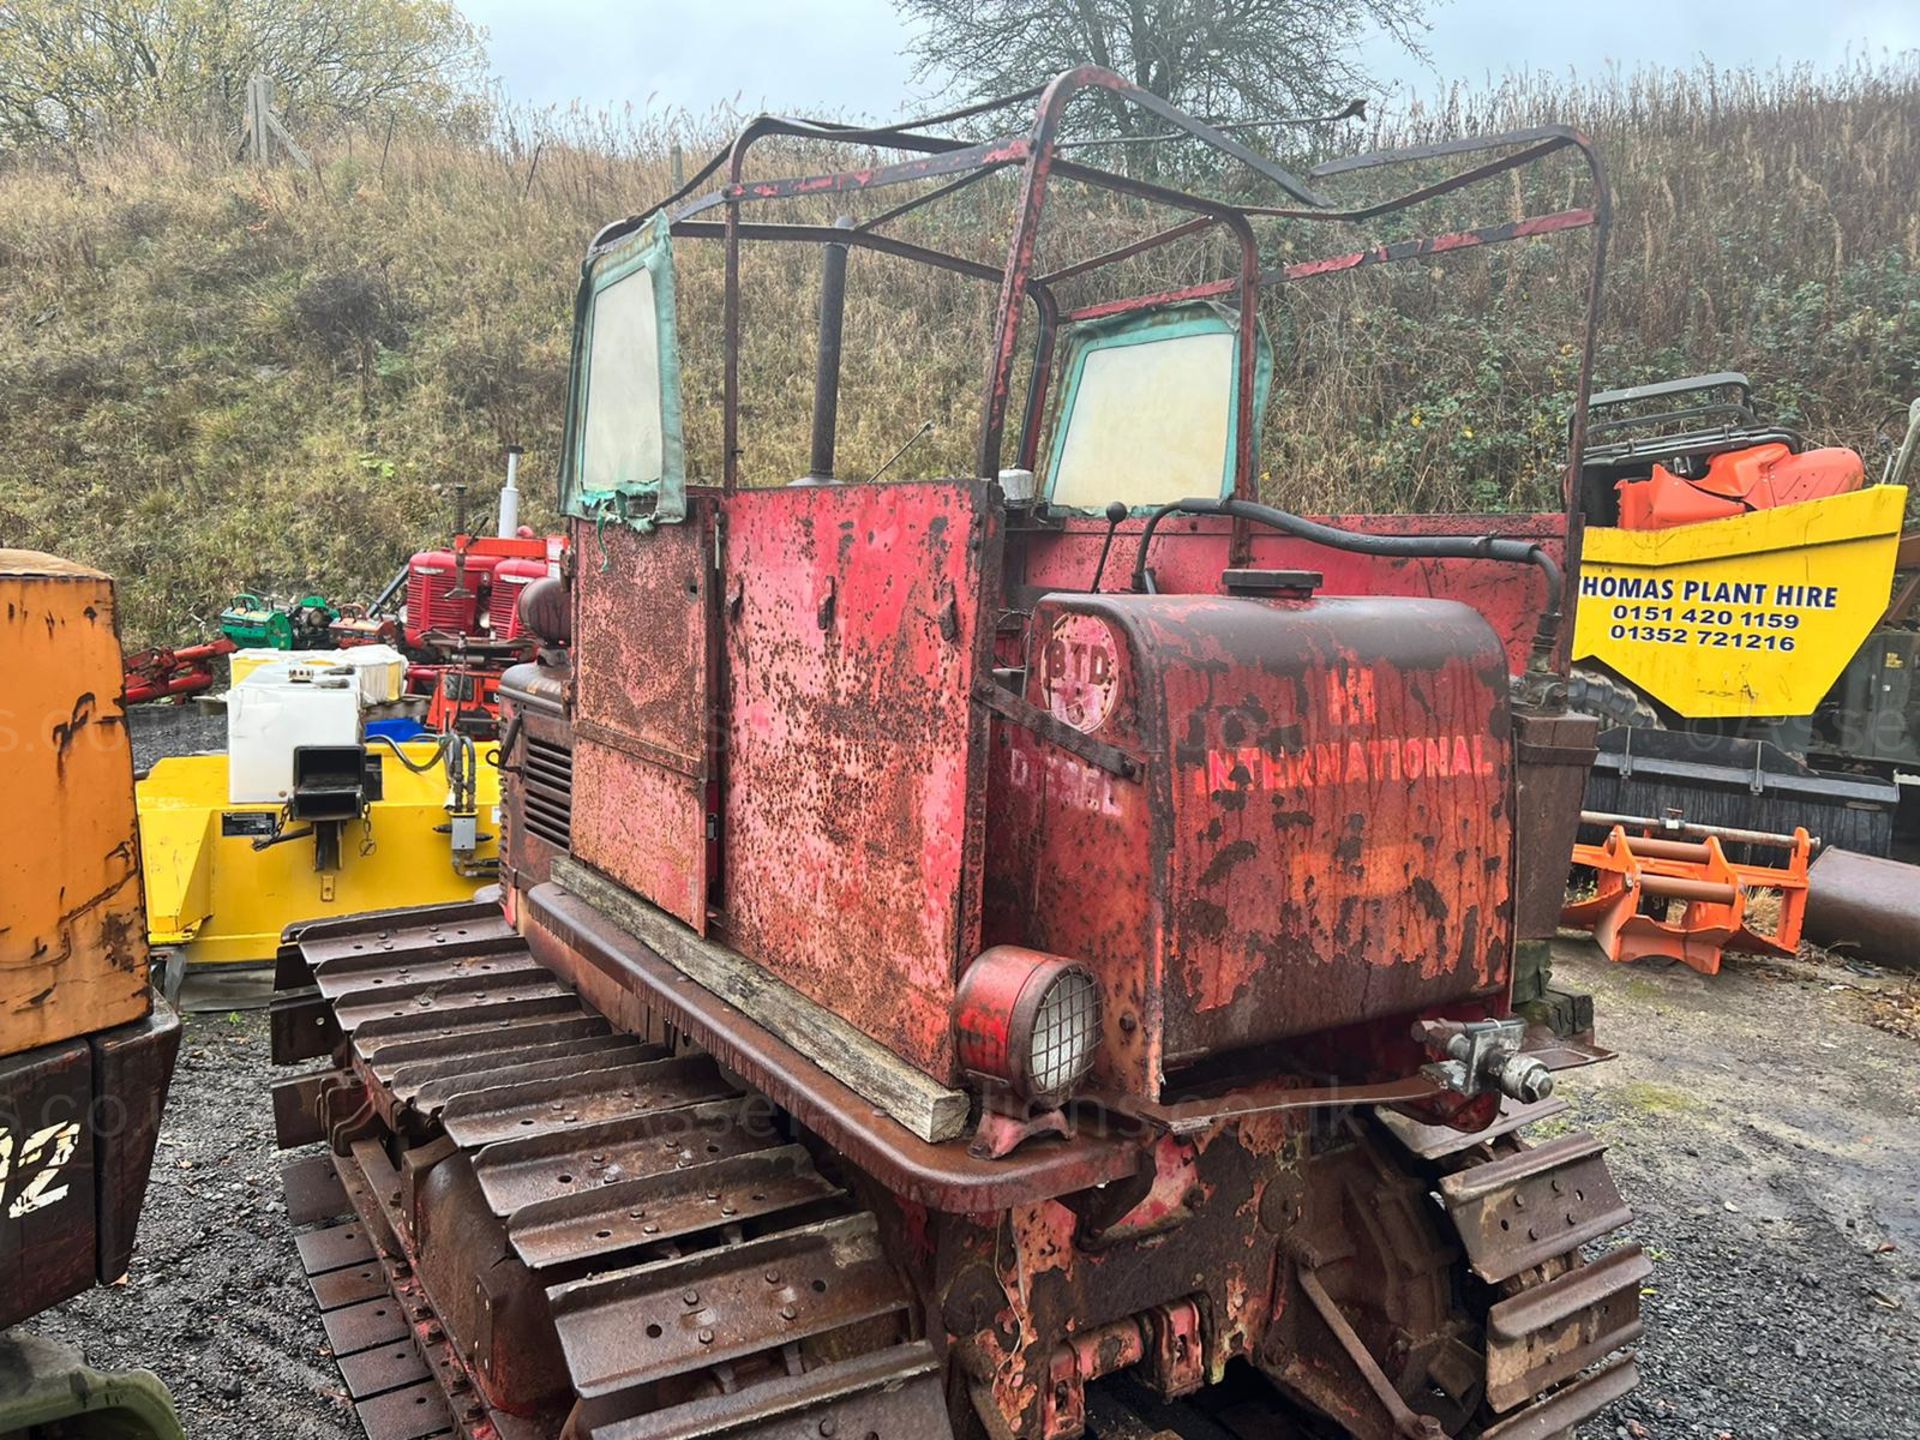 1955 INTERNATIONAL BTD6 39hp DIESEL TRACKED CRAWLER TRACTOR, RUNS AND DRIVES *PLUS VAT* - Image 3 of 9